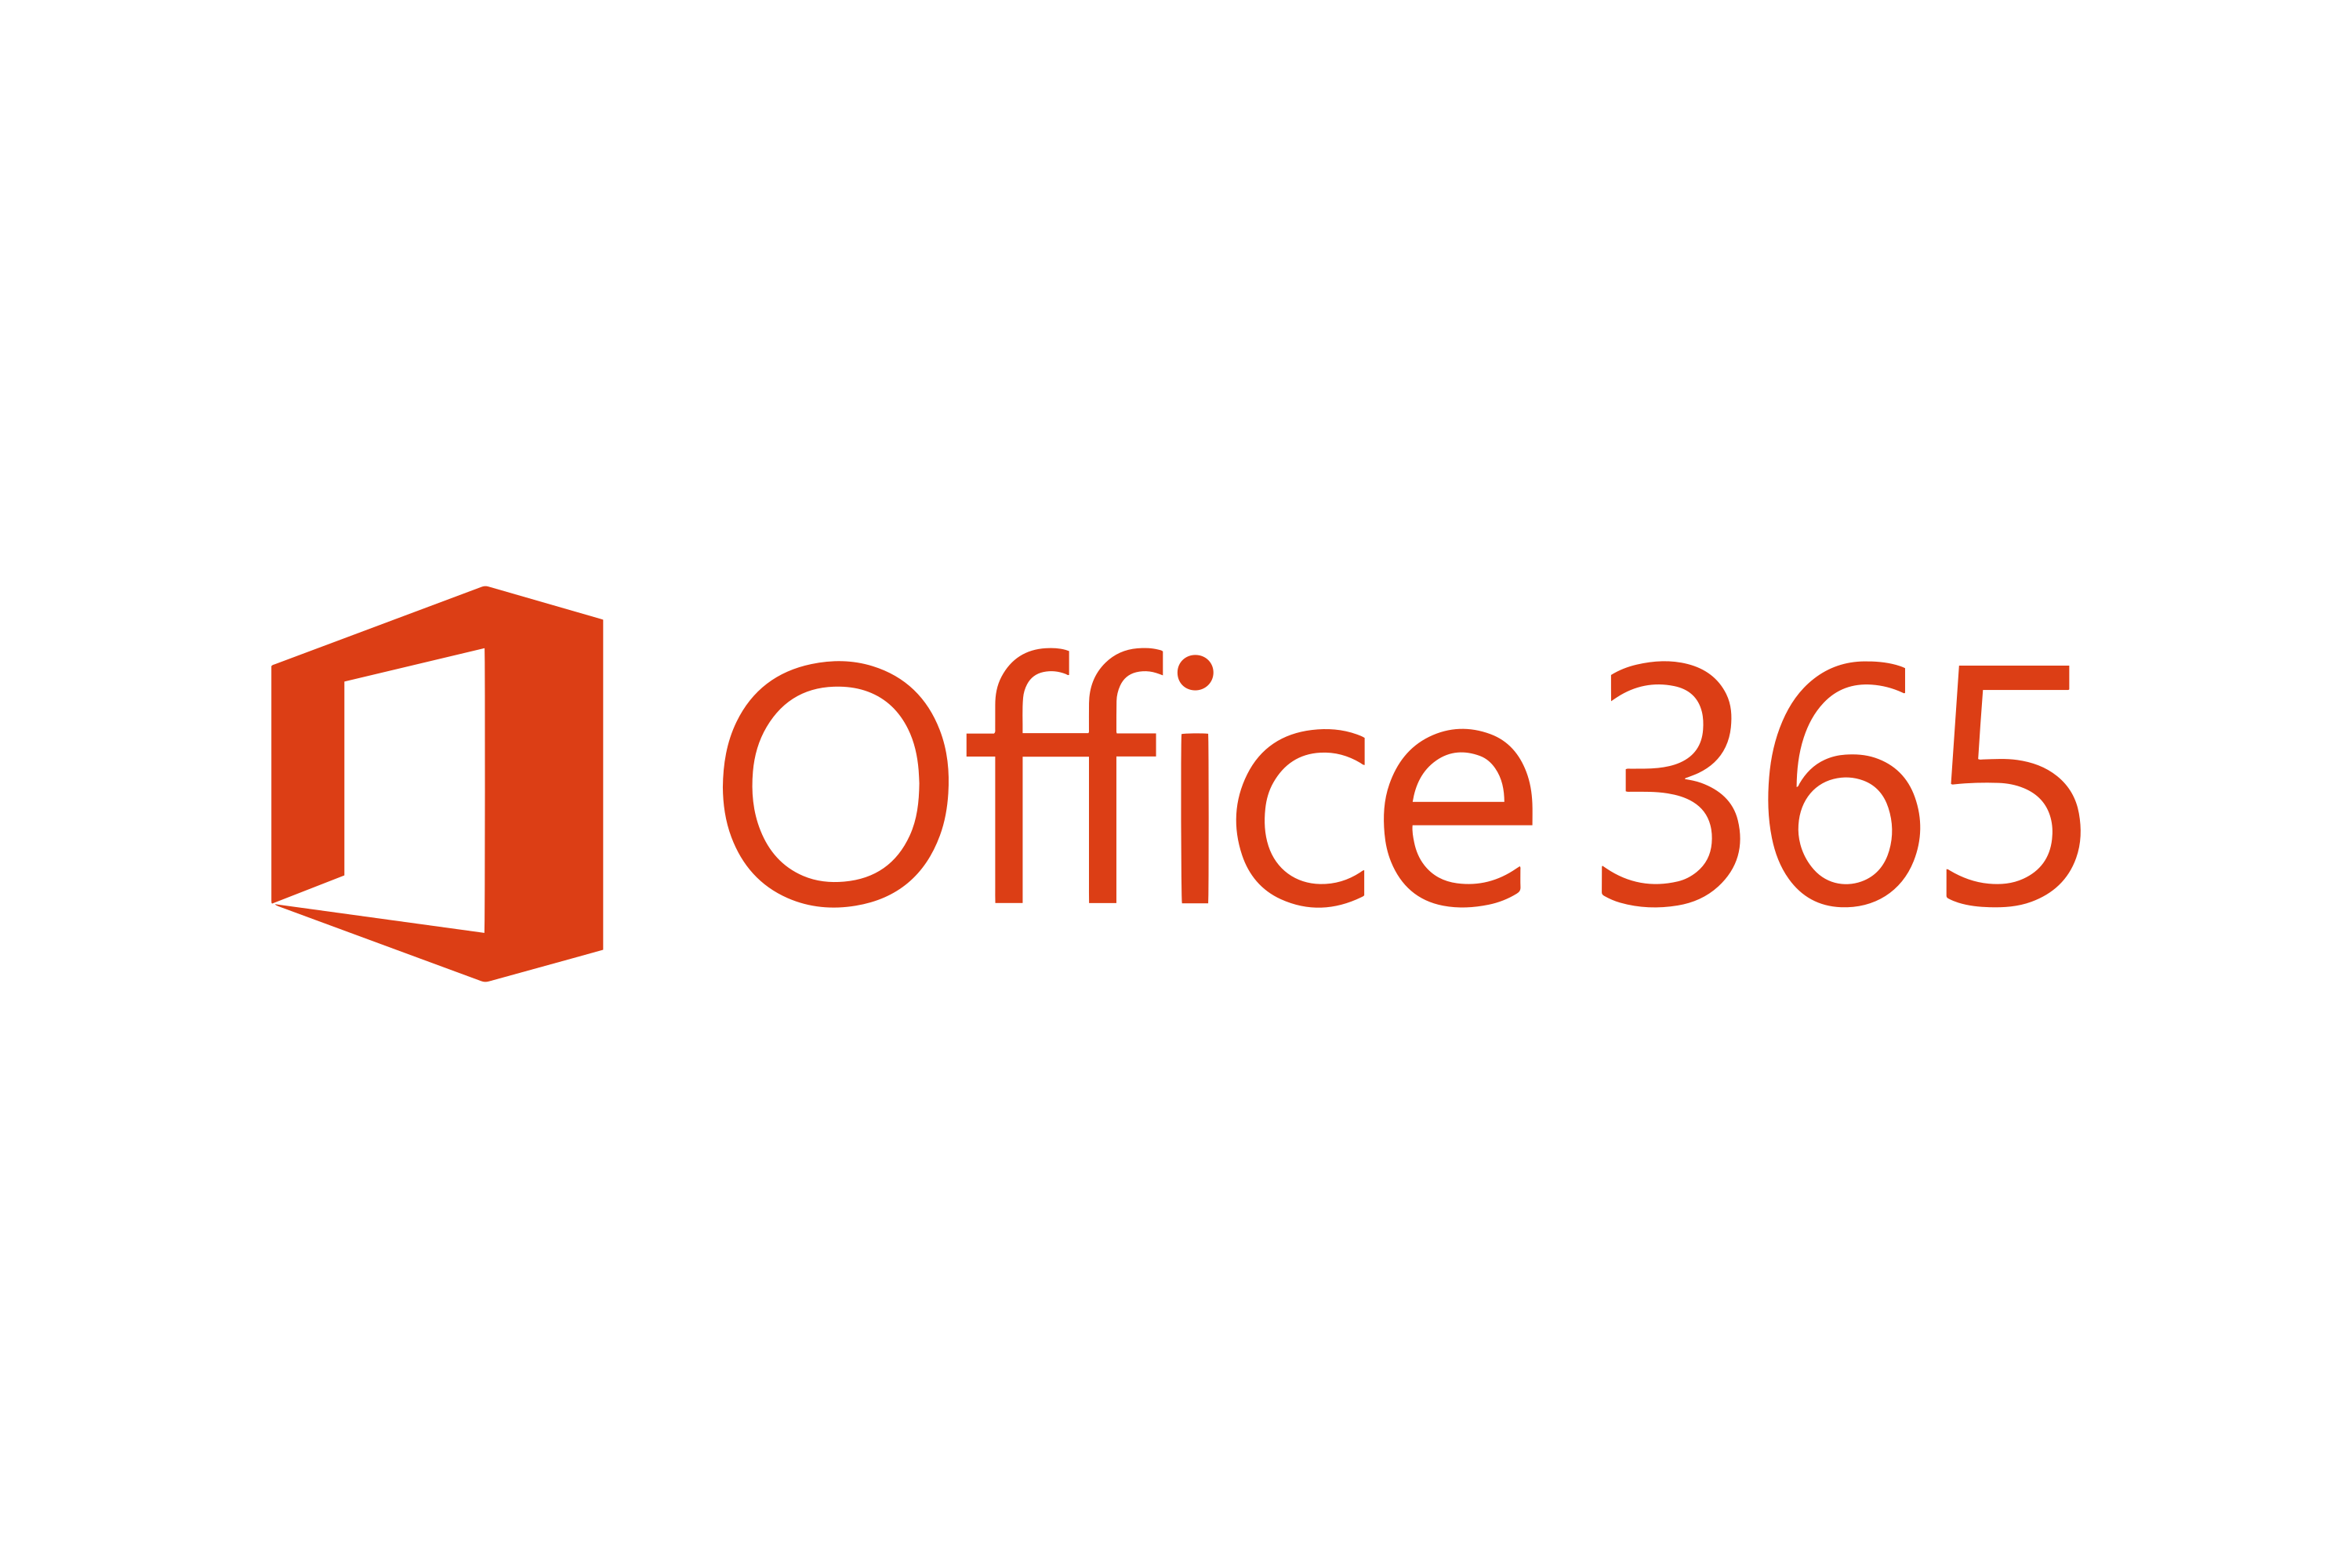 office-365-logo-about-image